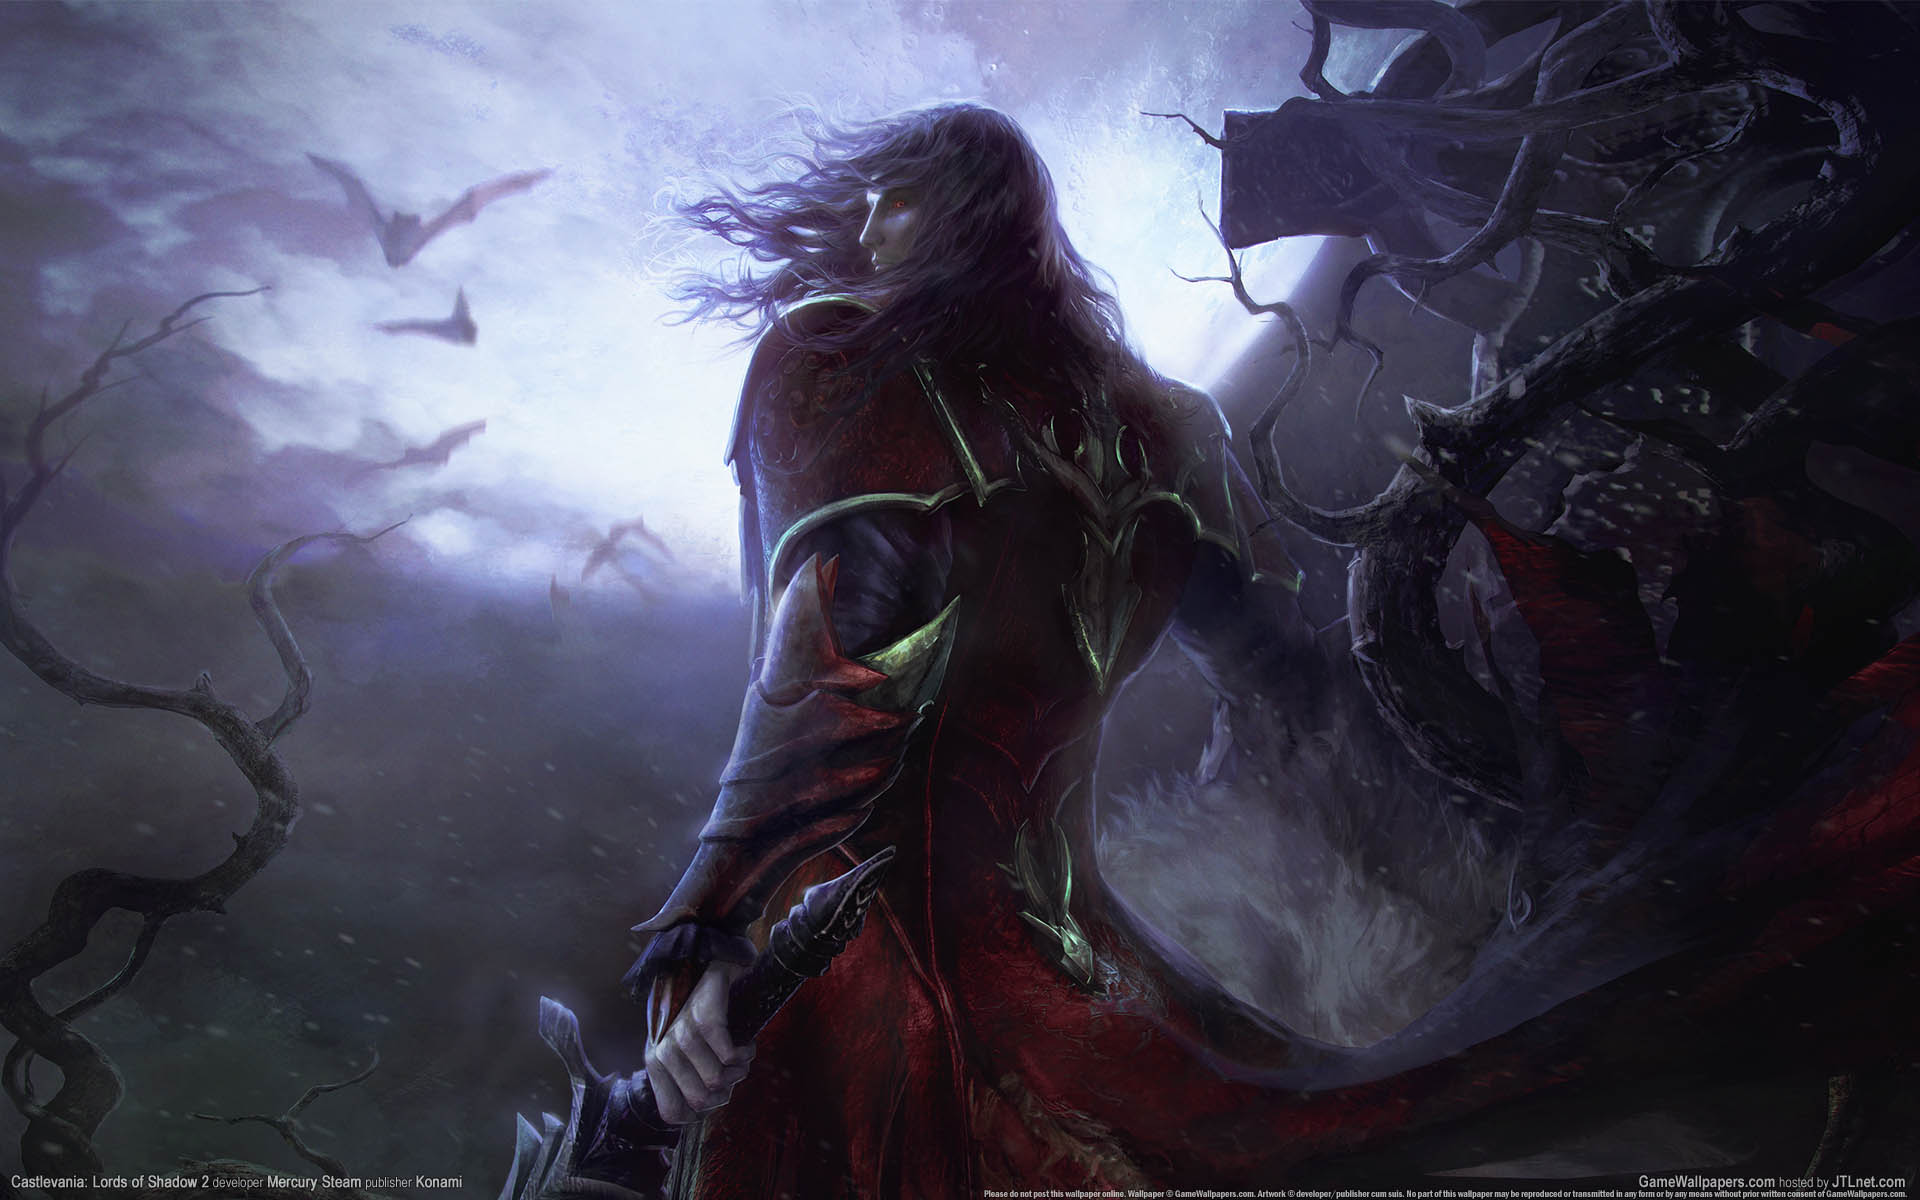 Castlevania%3A Lords of Shadow 2 wallpaper 01 1920x1200